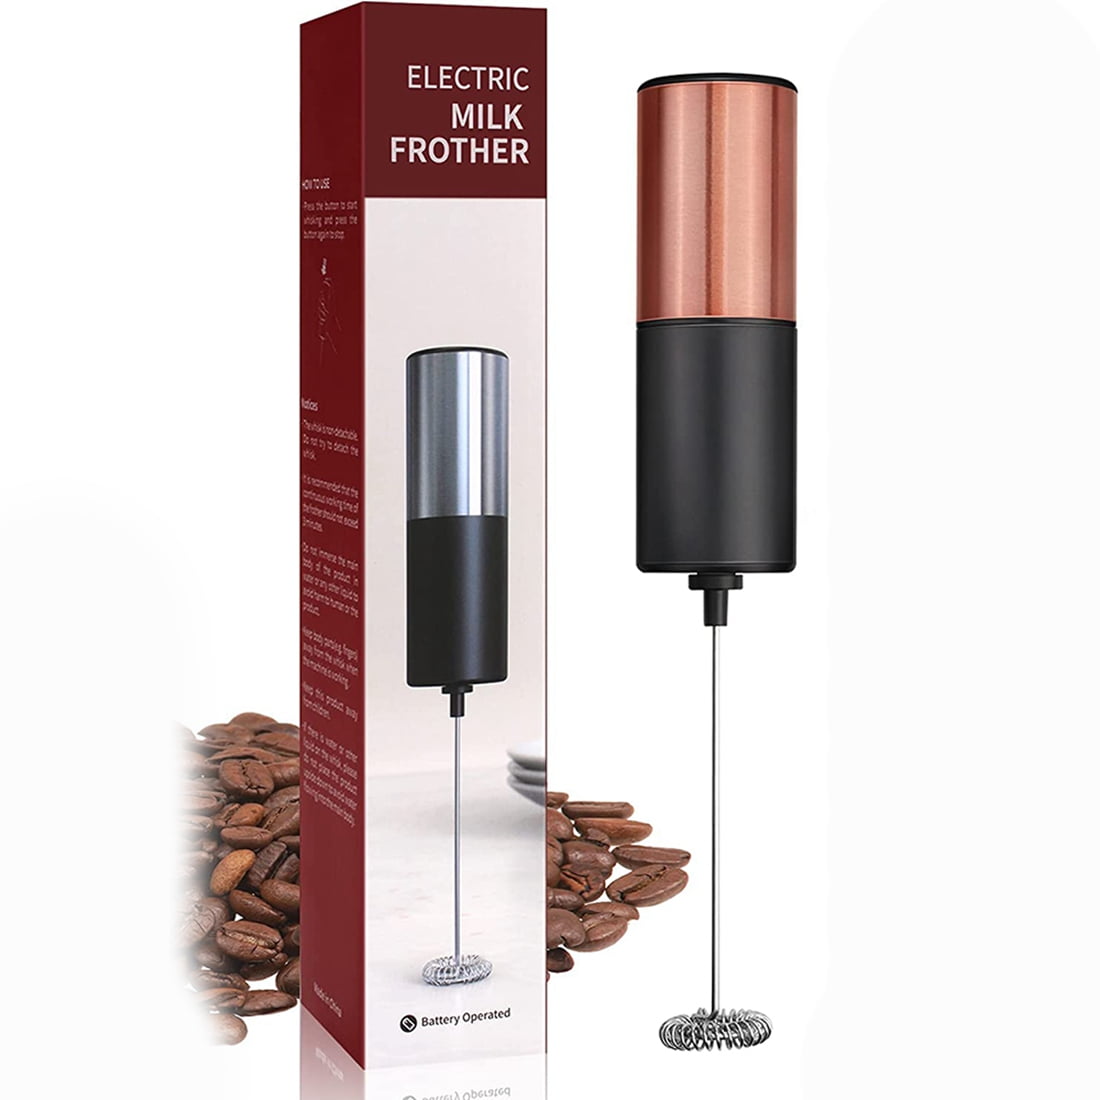 $4 MILK/COFFEE FROTHER ☕🥛😍 Loooove this handheld battery